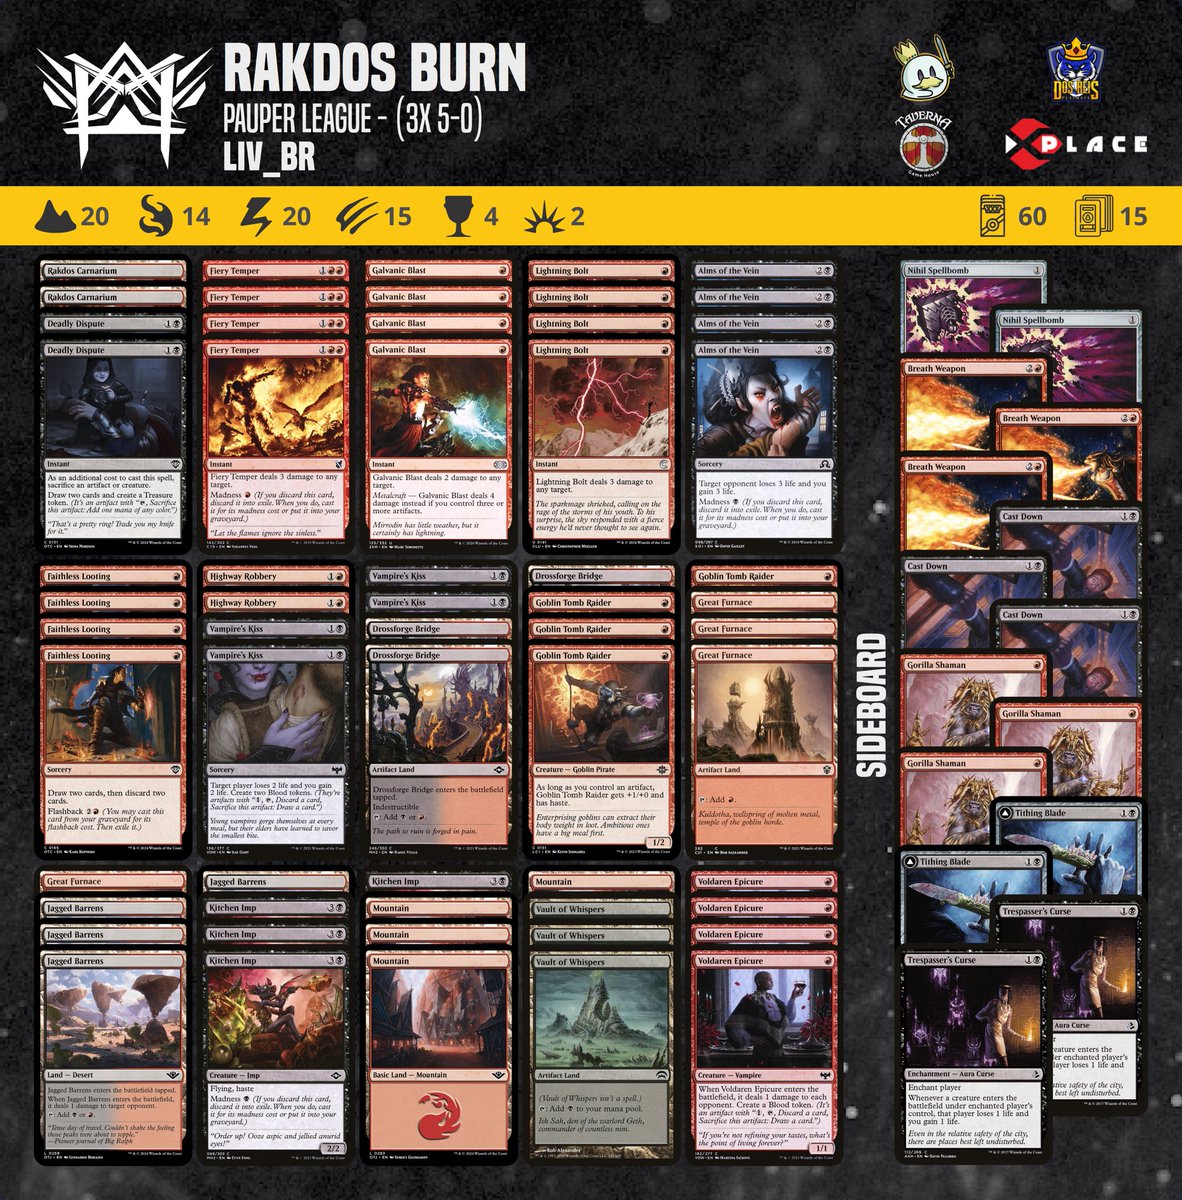 Our athlete Liv_BR achieved 3x 5-0 victories in the Pauper League tournament with this Rakdos Burn decklist. 

#pauper  #magic #mtgcommon #metagamepauper #mtgpauper #magicthegathering #wizardsofthecoast

@PauperDecklists @fireshoes